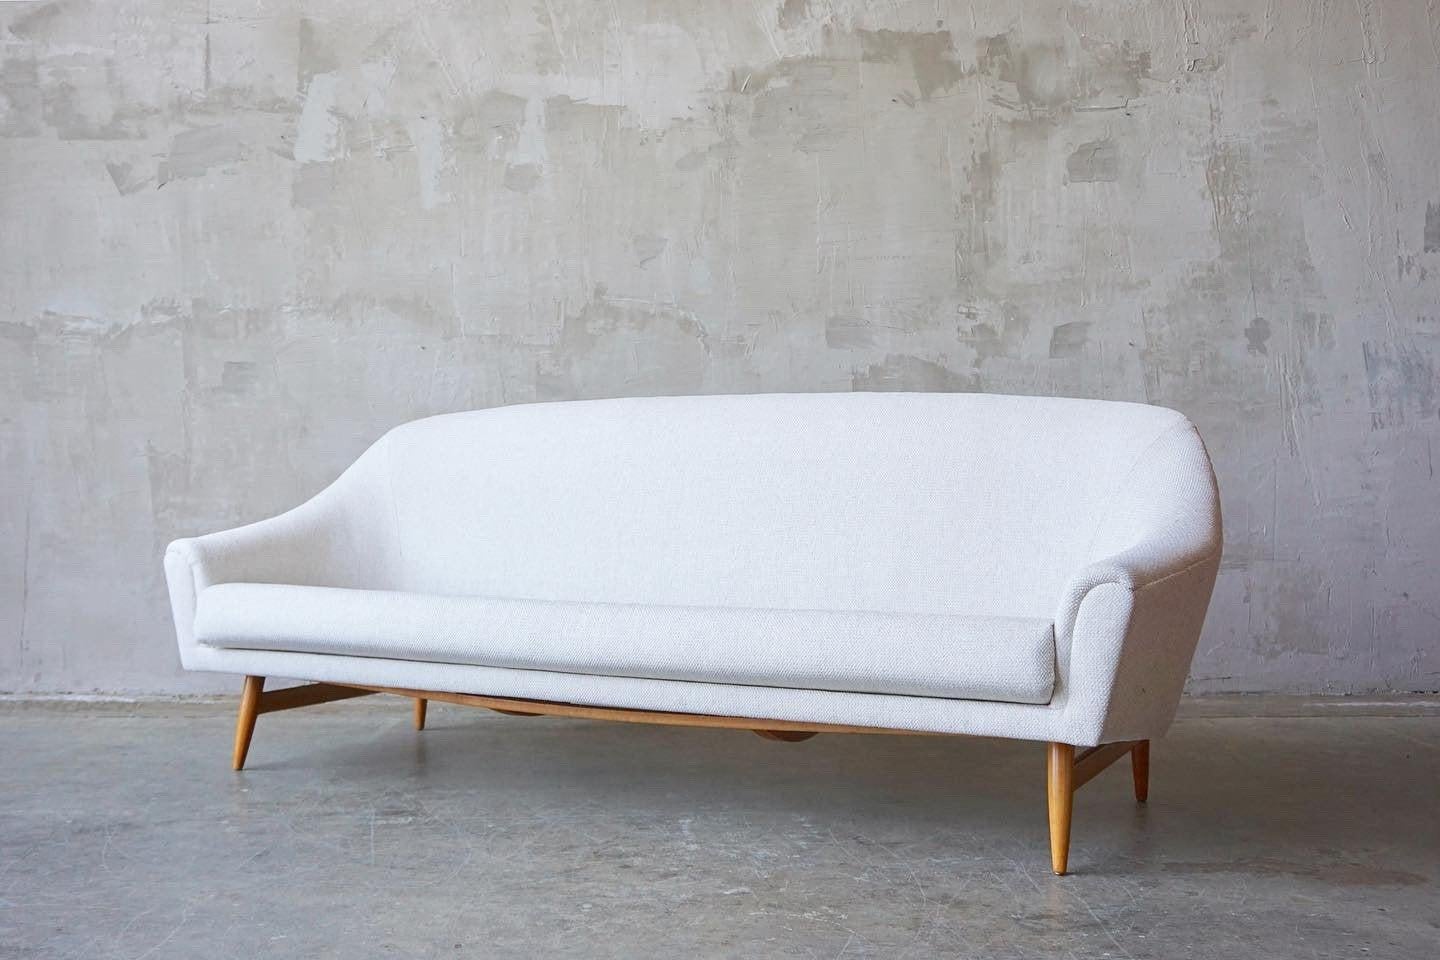 Offered by F&F vintage, this beautifully designed bracket-back sofa attributed to Theo Ruth, circa 1960s. 

This piece has been expertly recovered in an off-white vintage tweed fabric. The solid wood legs have been refinished. 

Measures 81” W x